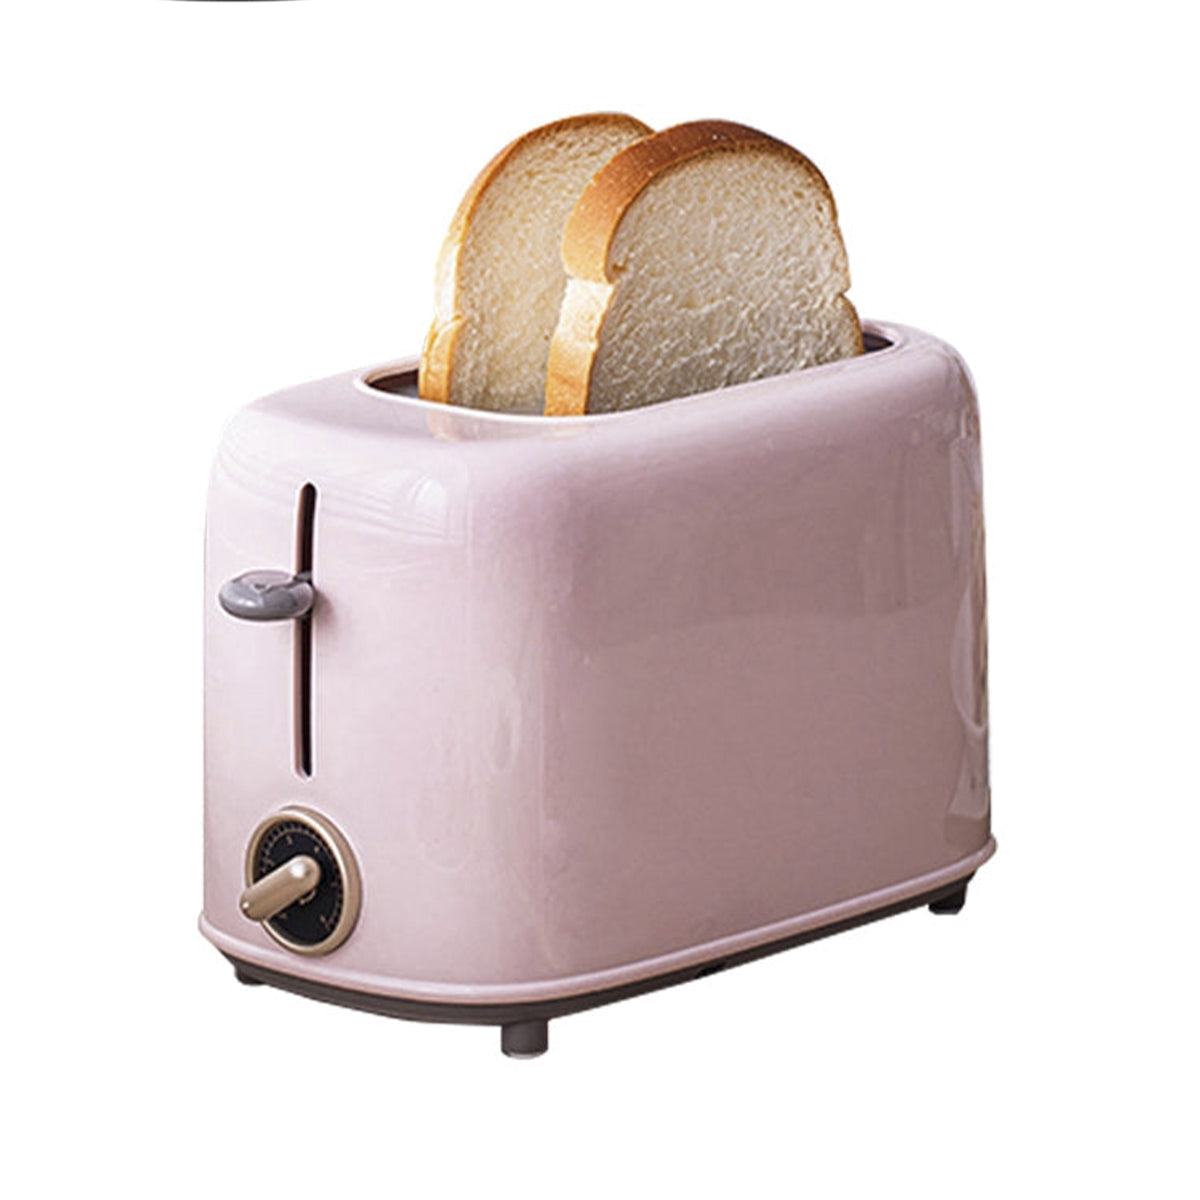 Authentic Toaster